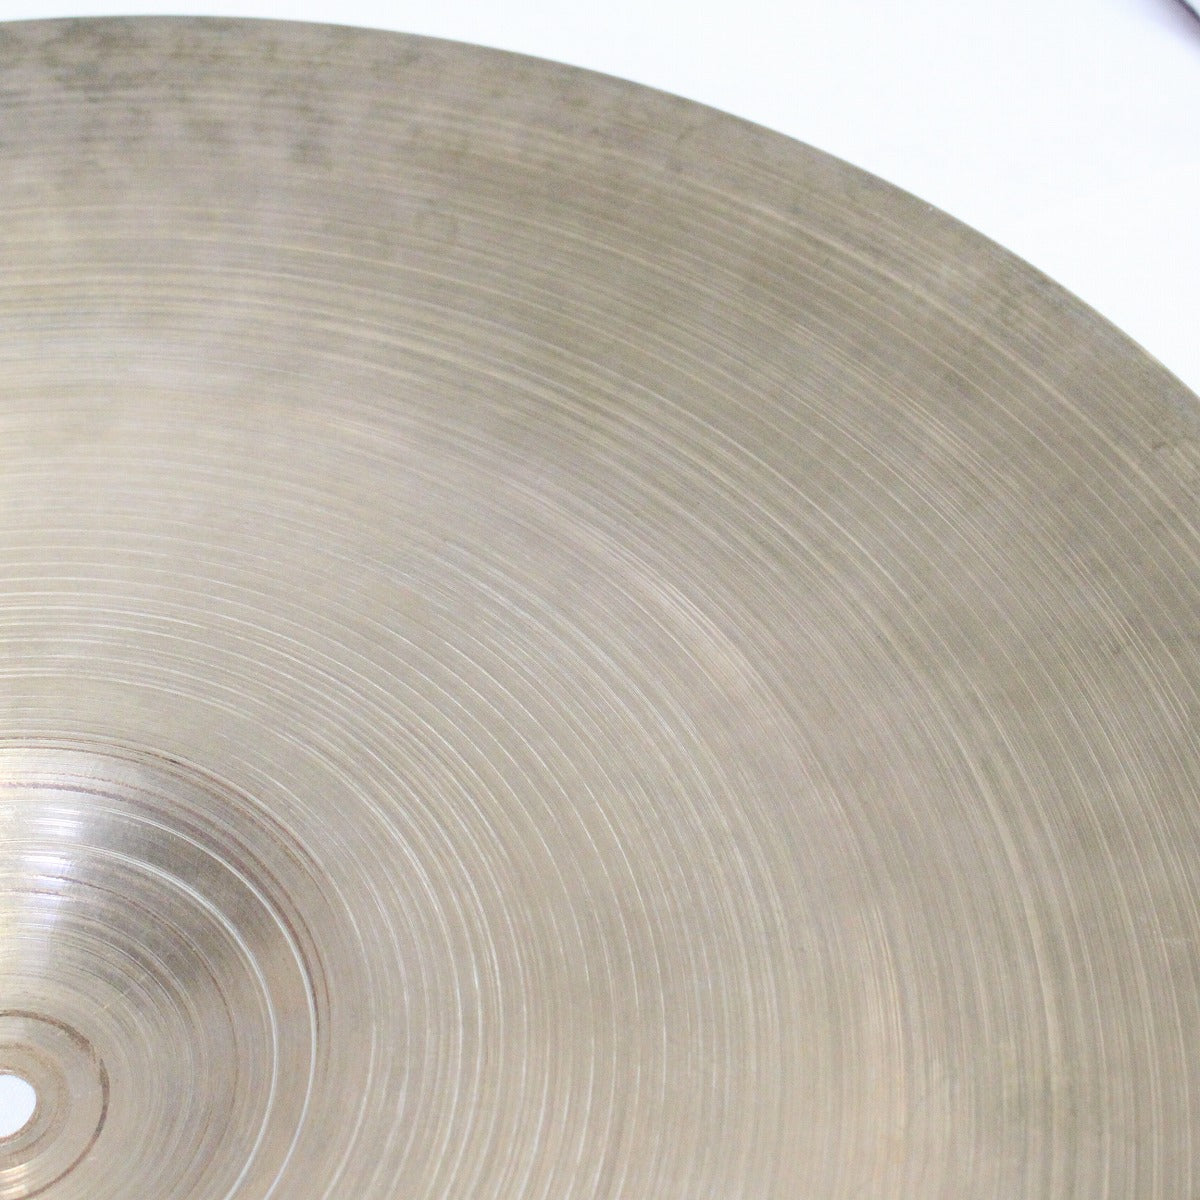 USED ZILDJIAN / Late50s A Small Stamp 20" 1992g Old A Ride Cymbal [08]